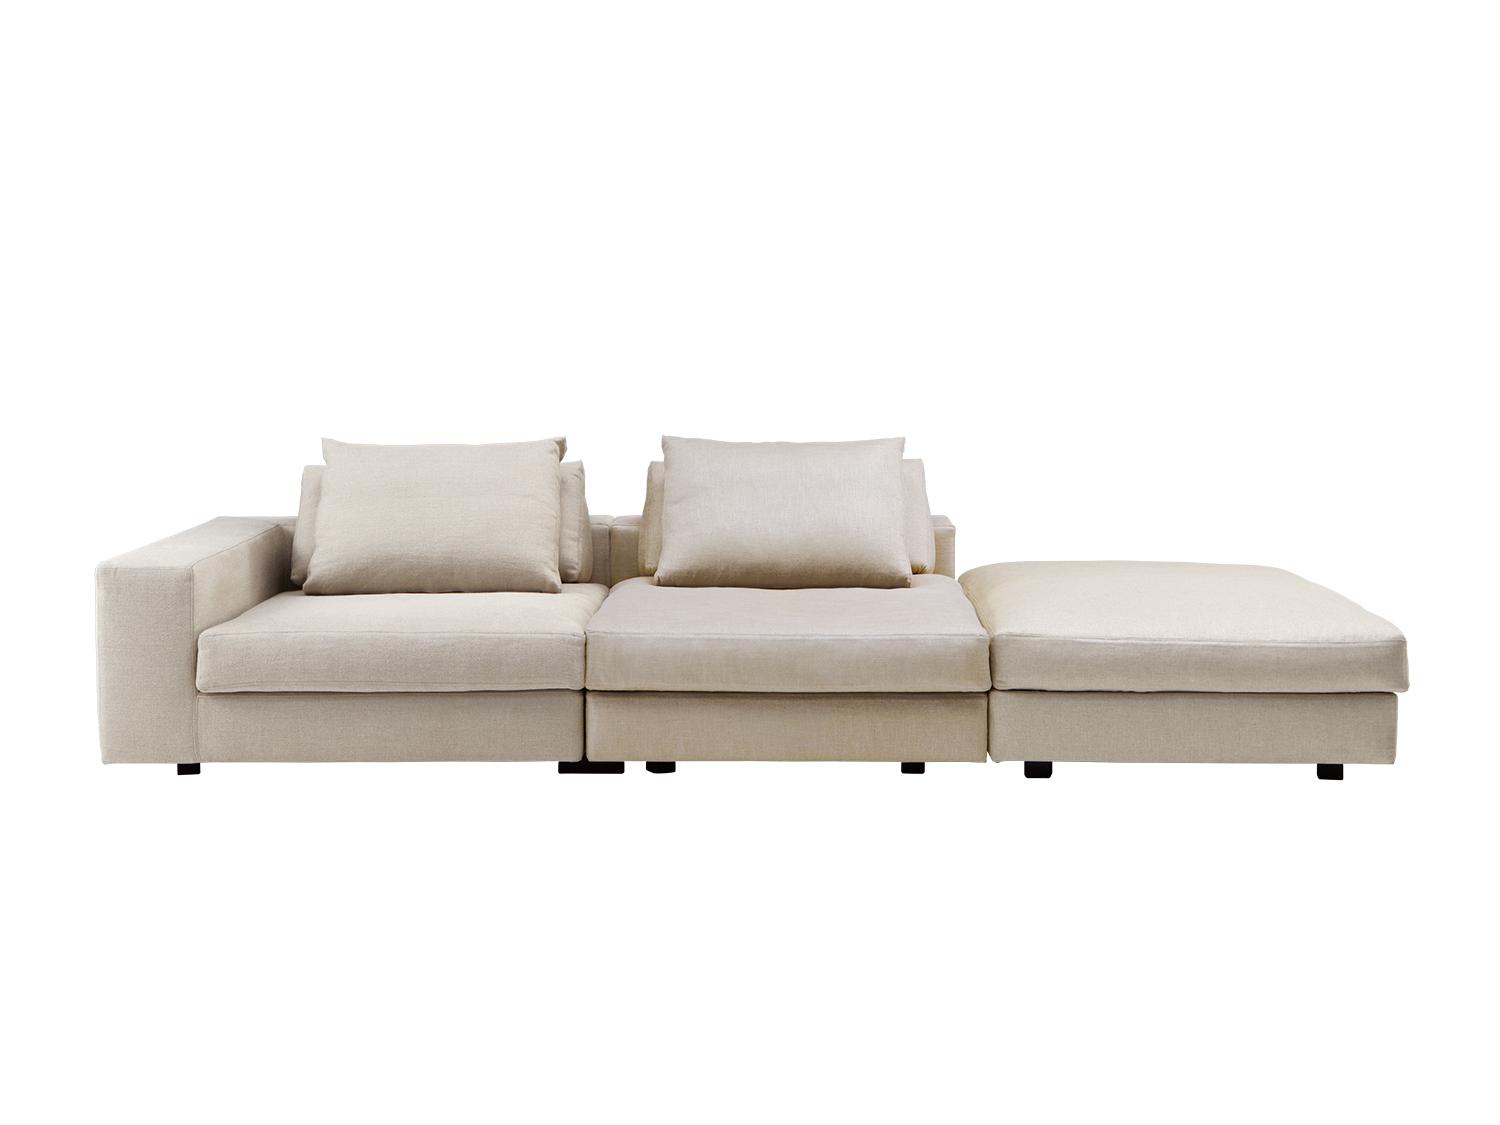 GREAT PAMPAS SYSTEM SOFA